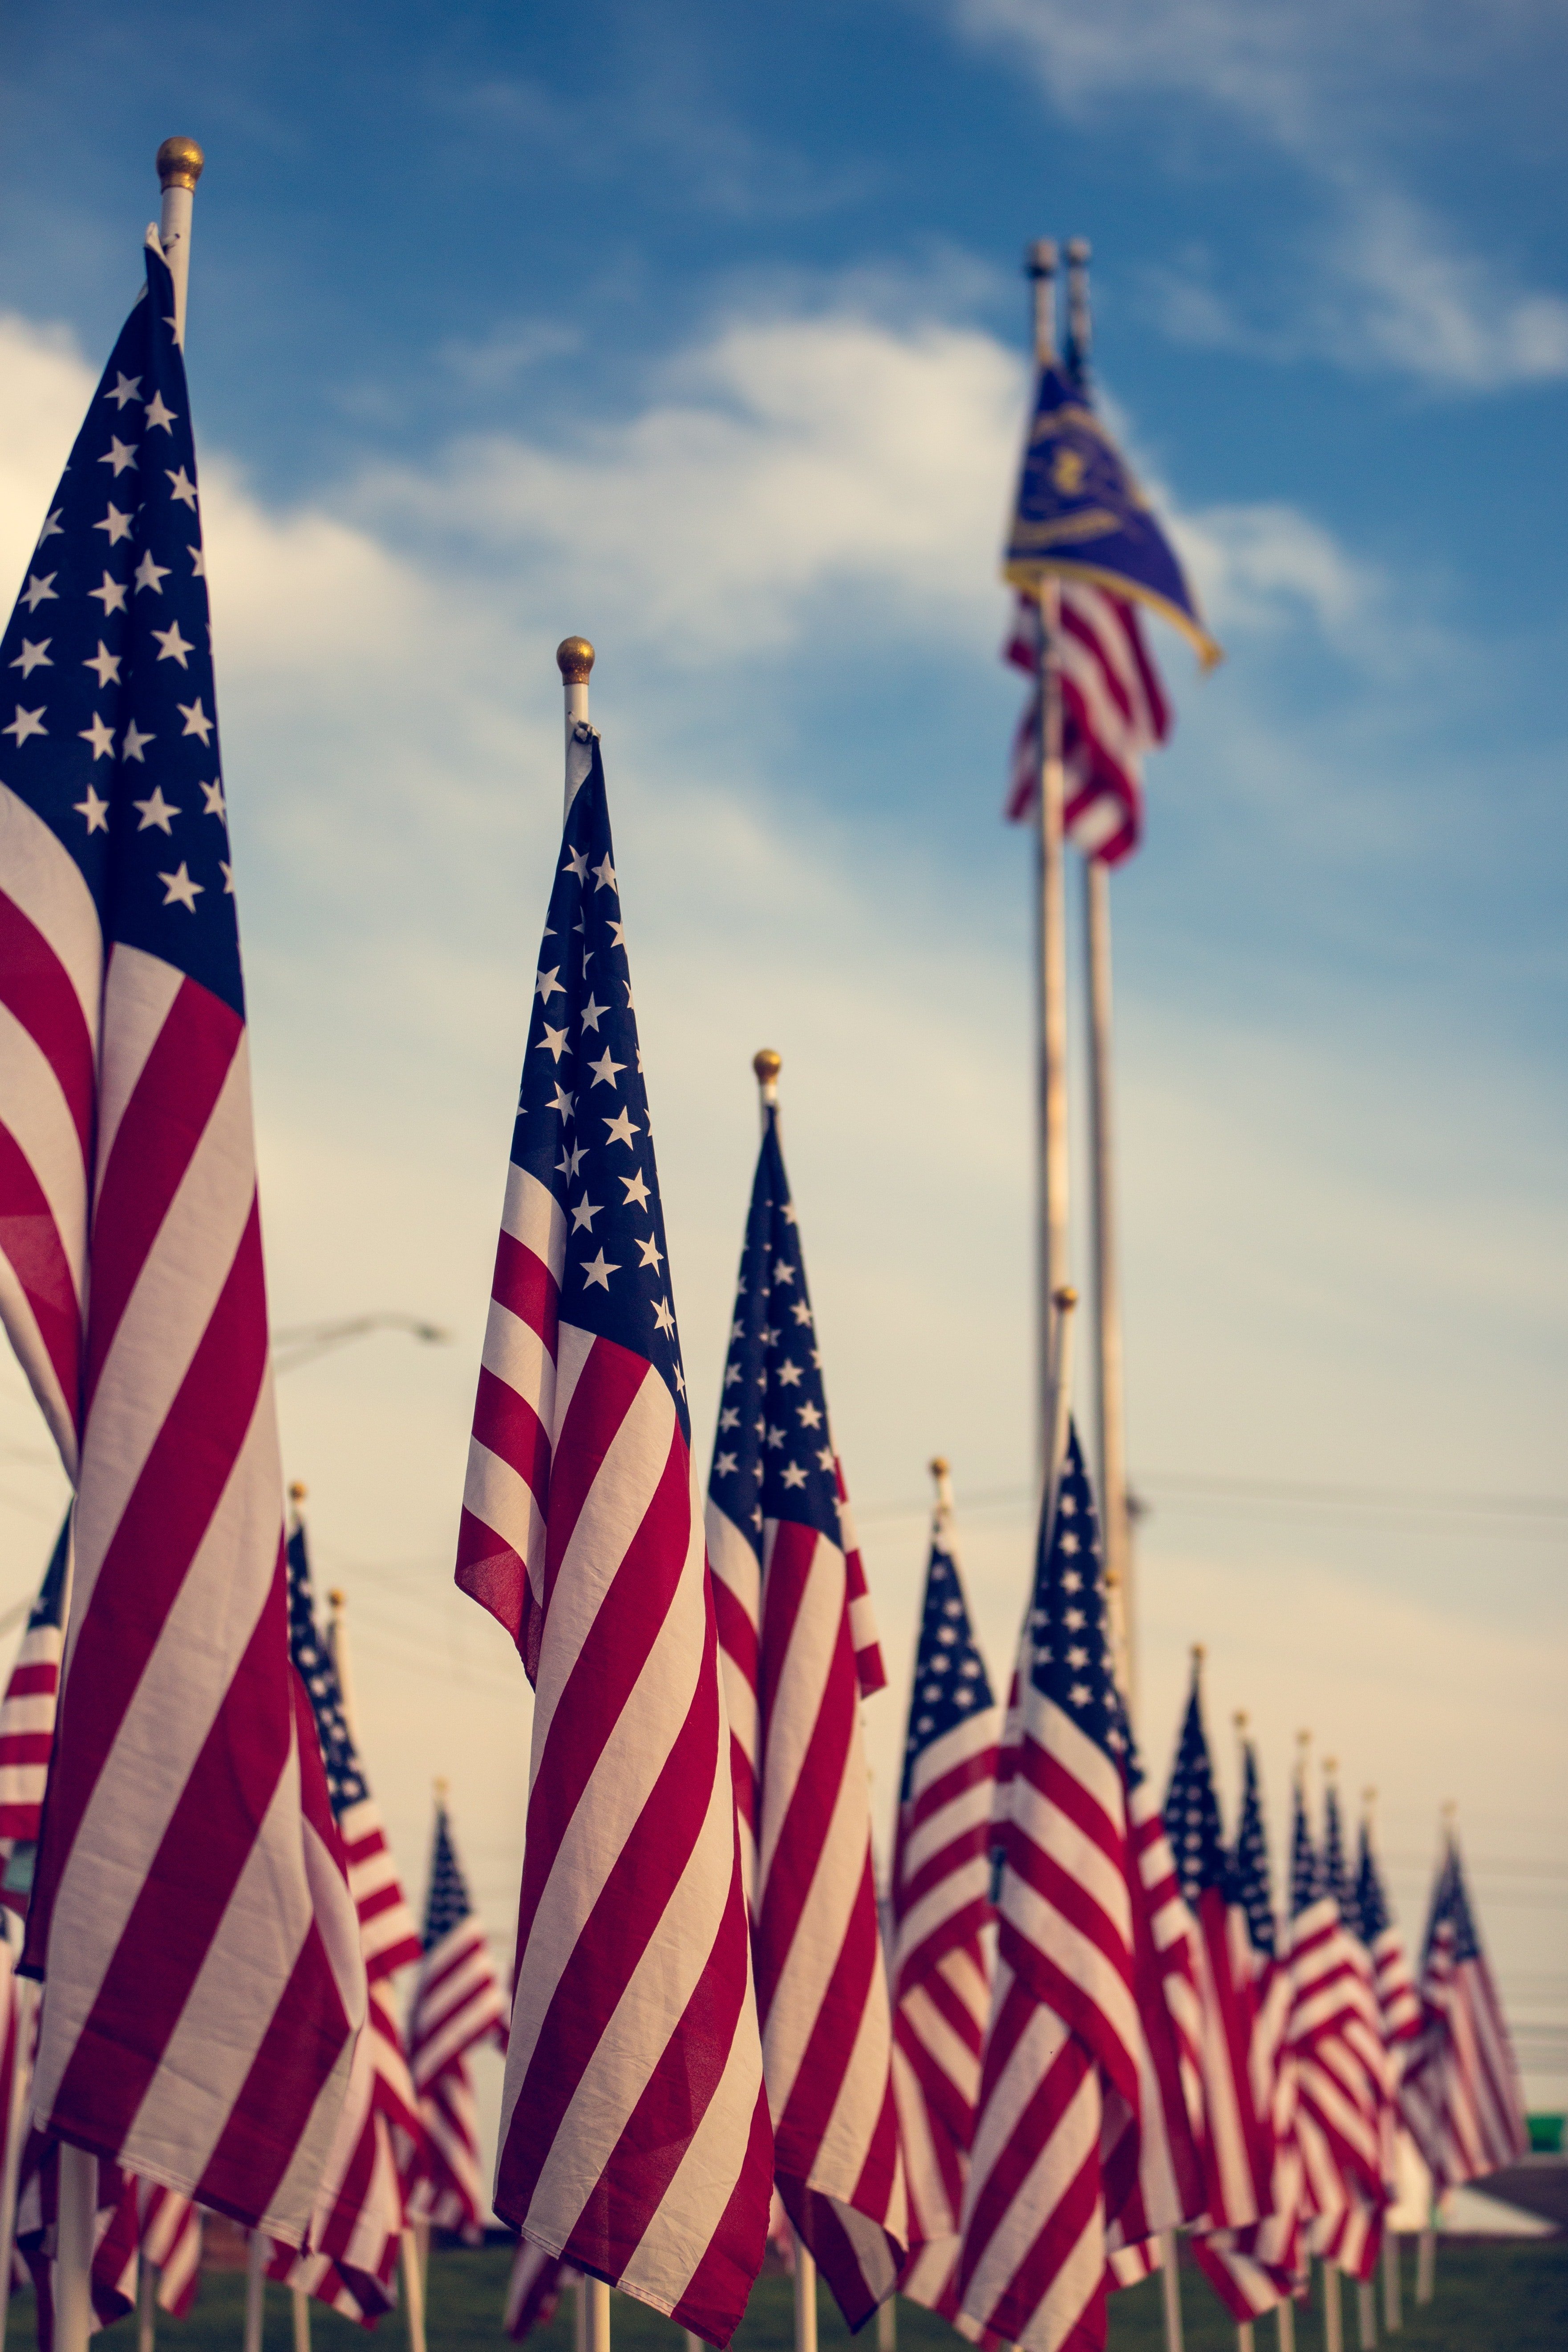 American flags lined-up | Photo: Pexels